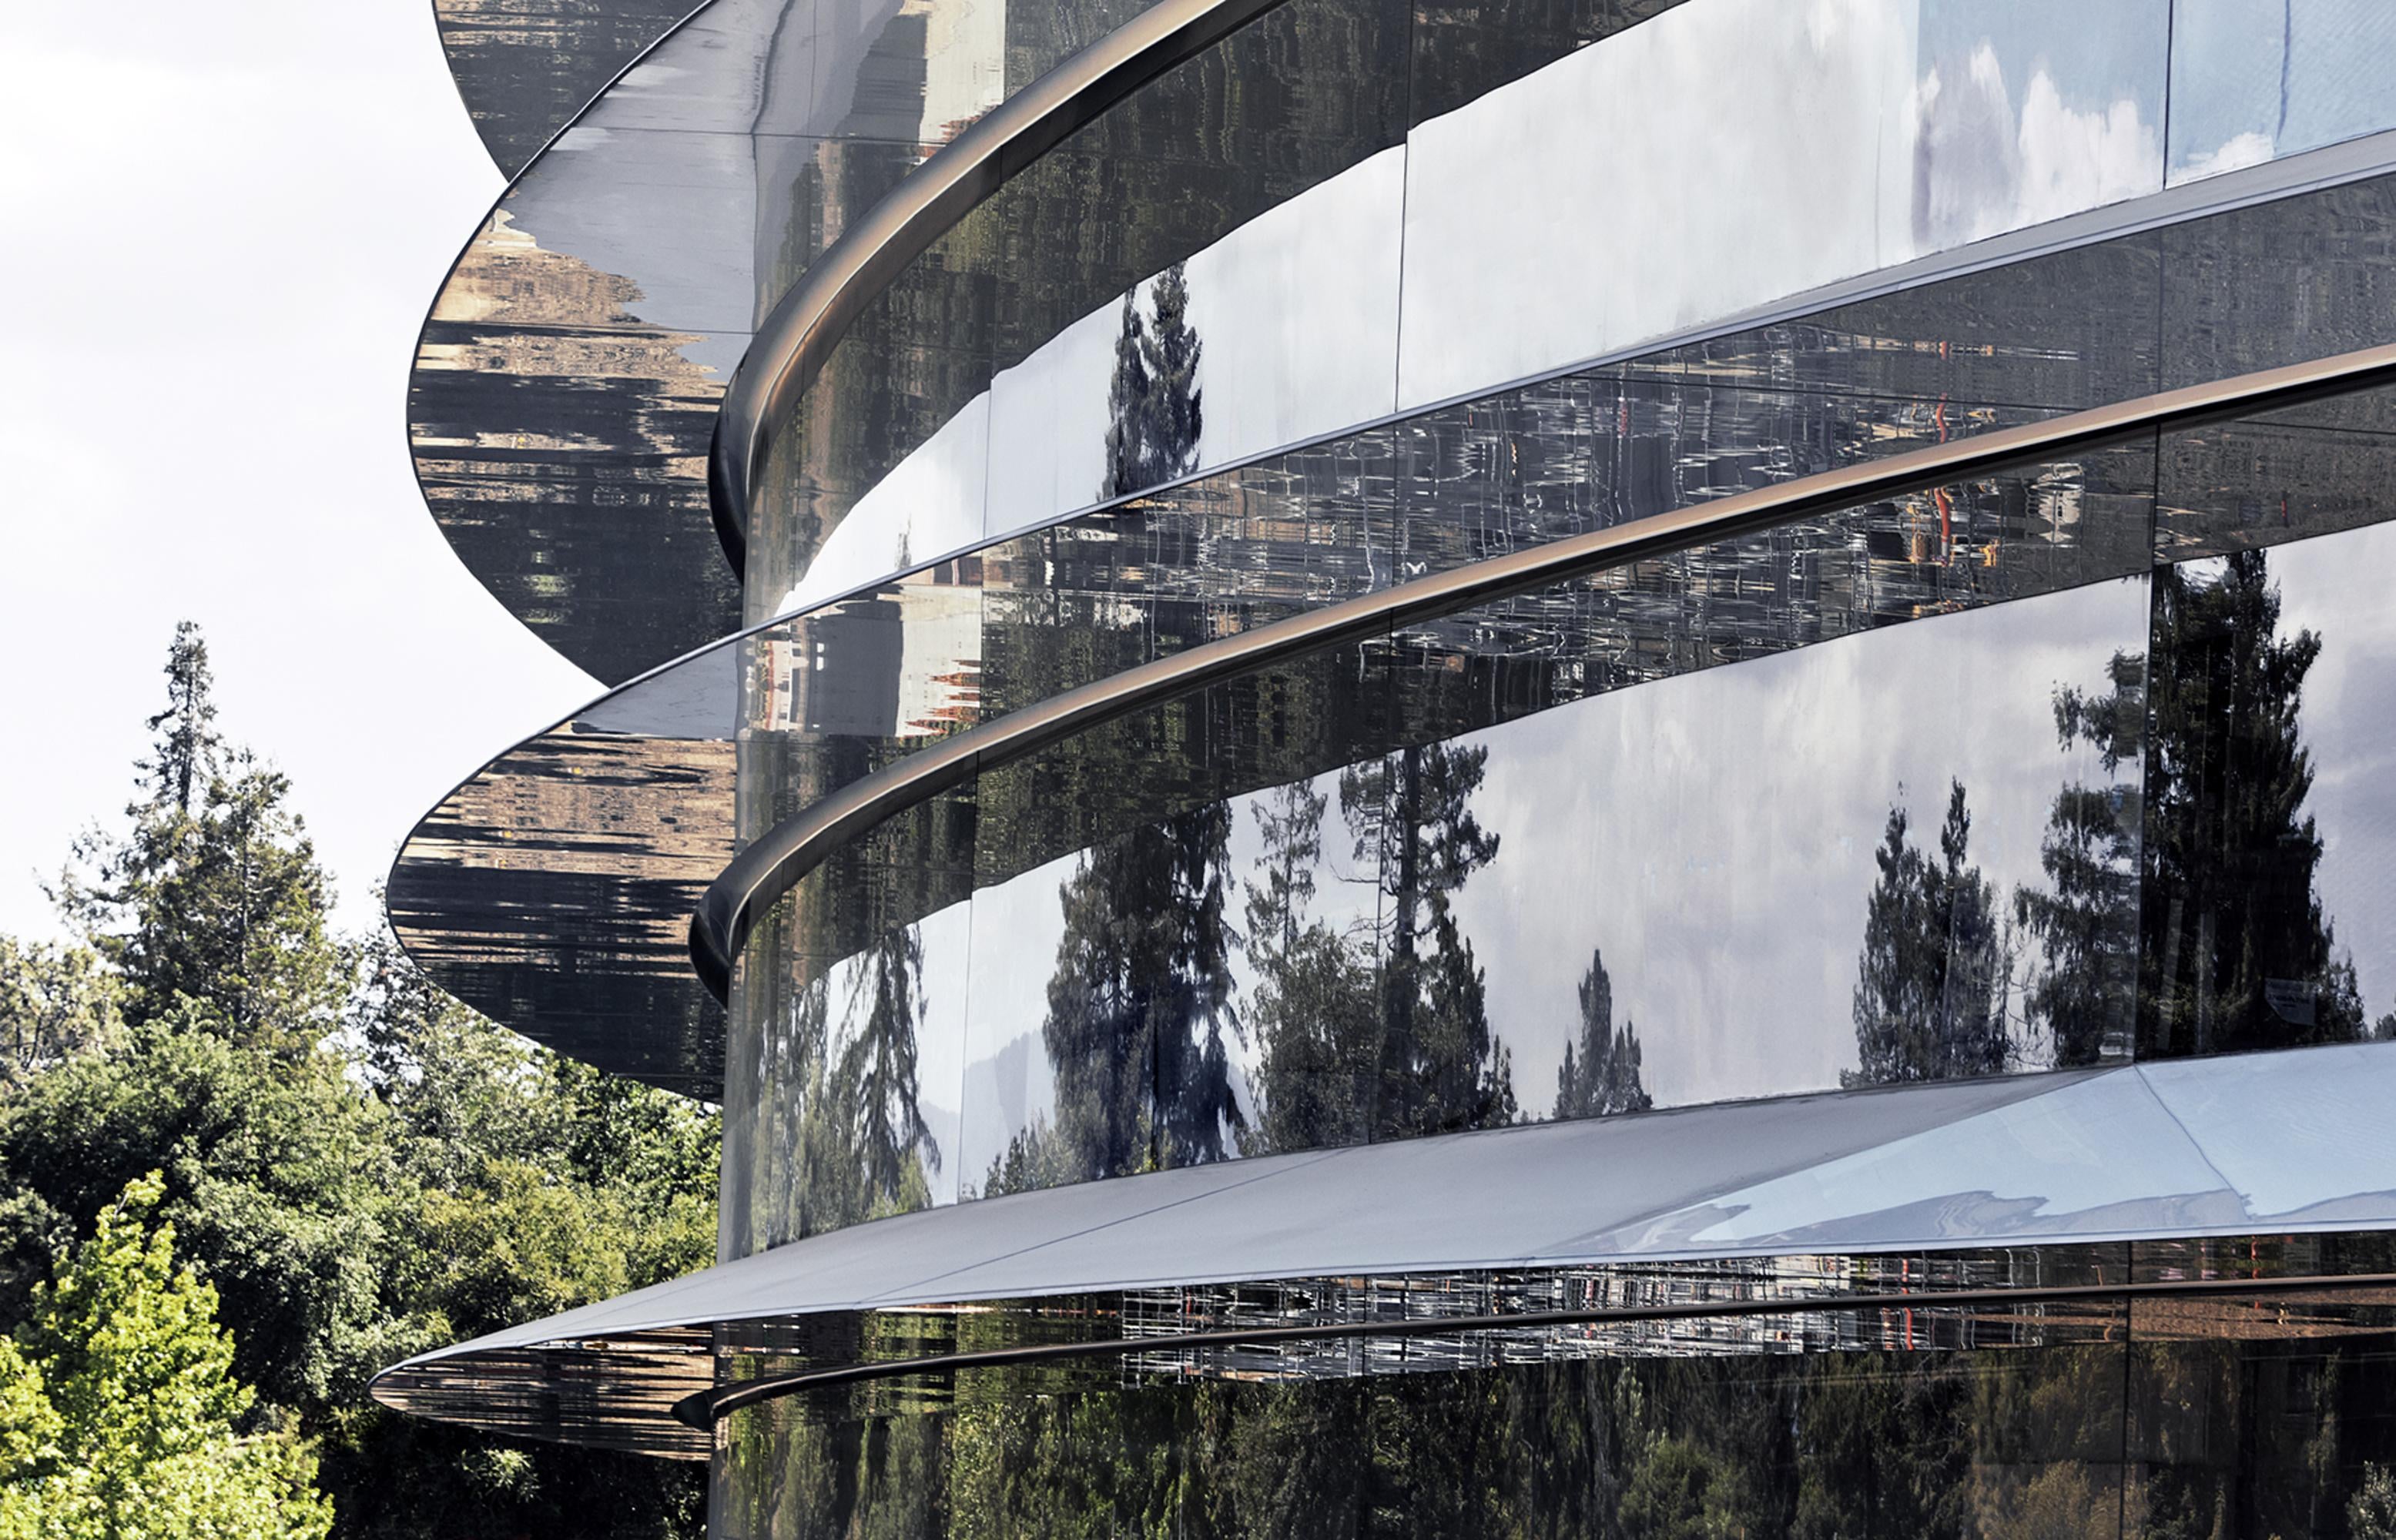 Curved glass encompassing the ring-shaped building reflects the surrounding vegetation. - All future Apple products will come from this amazing new office building